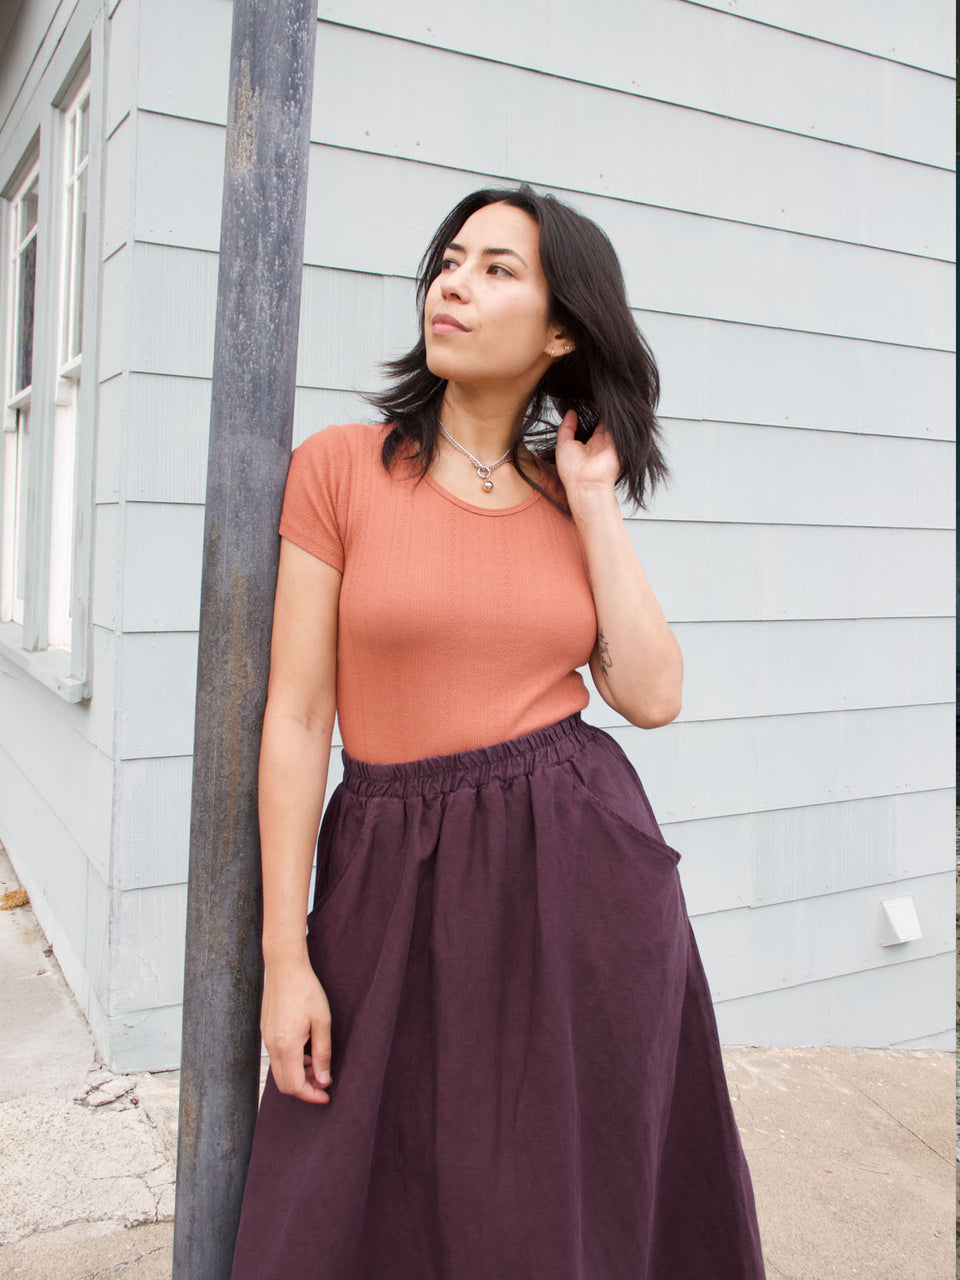 Curator SF | Ethical Women's Clothing Made in San Francisco